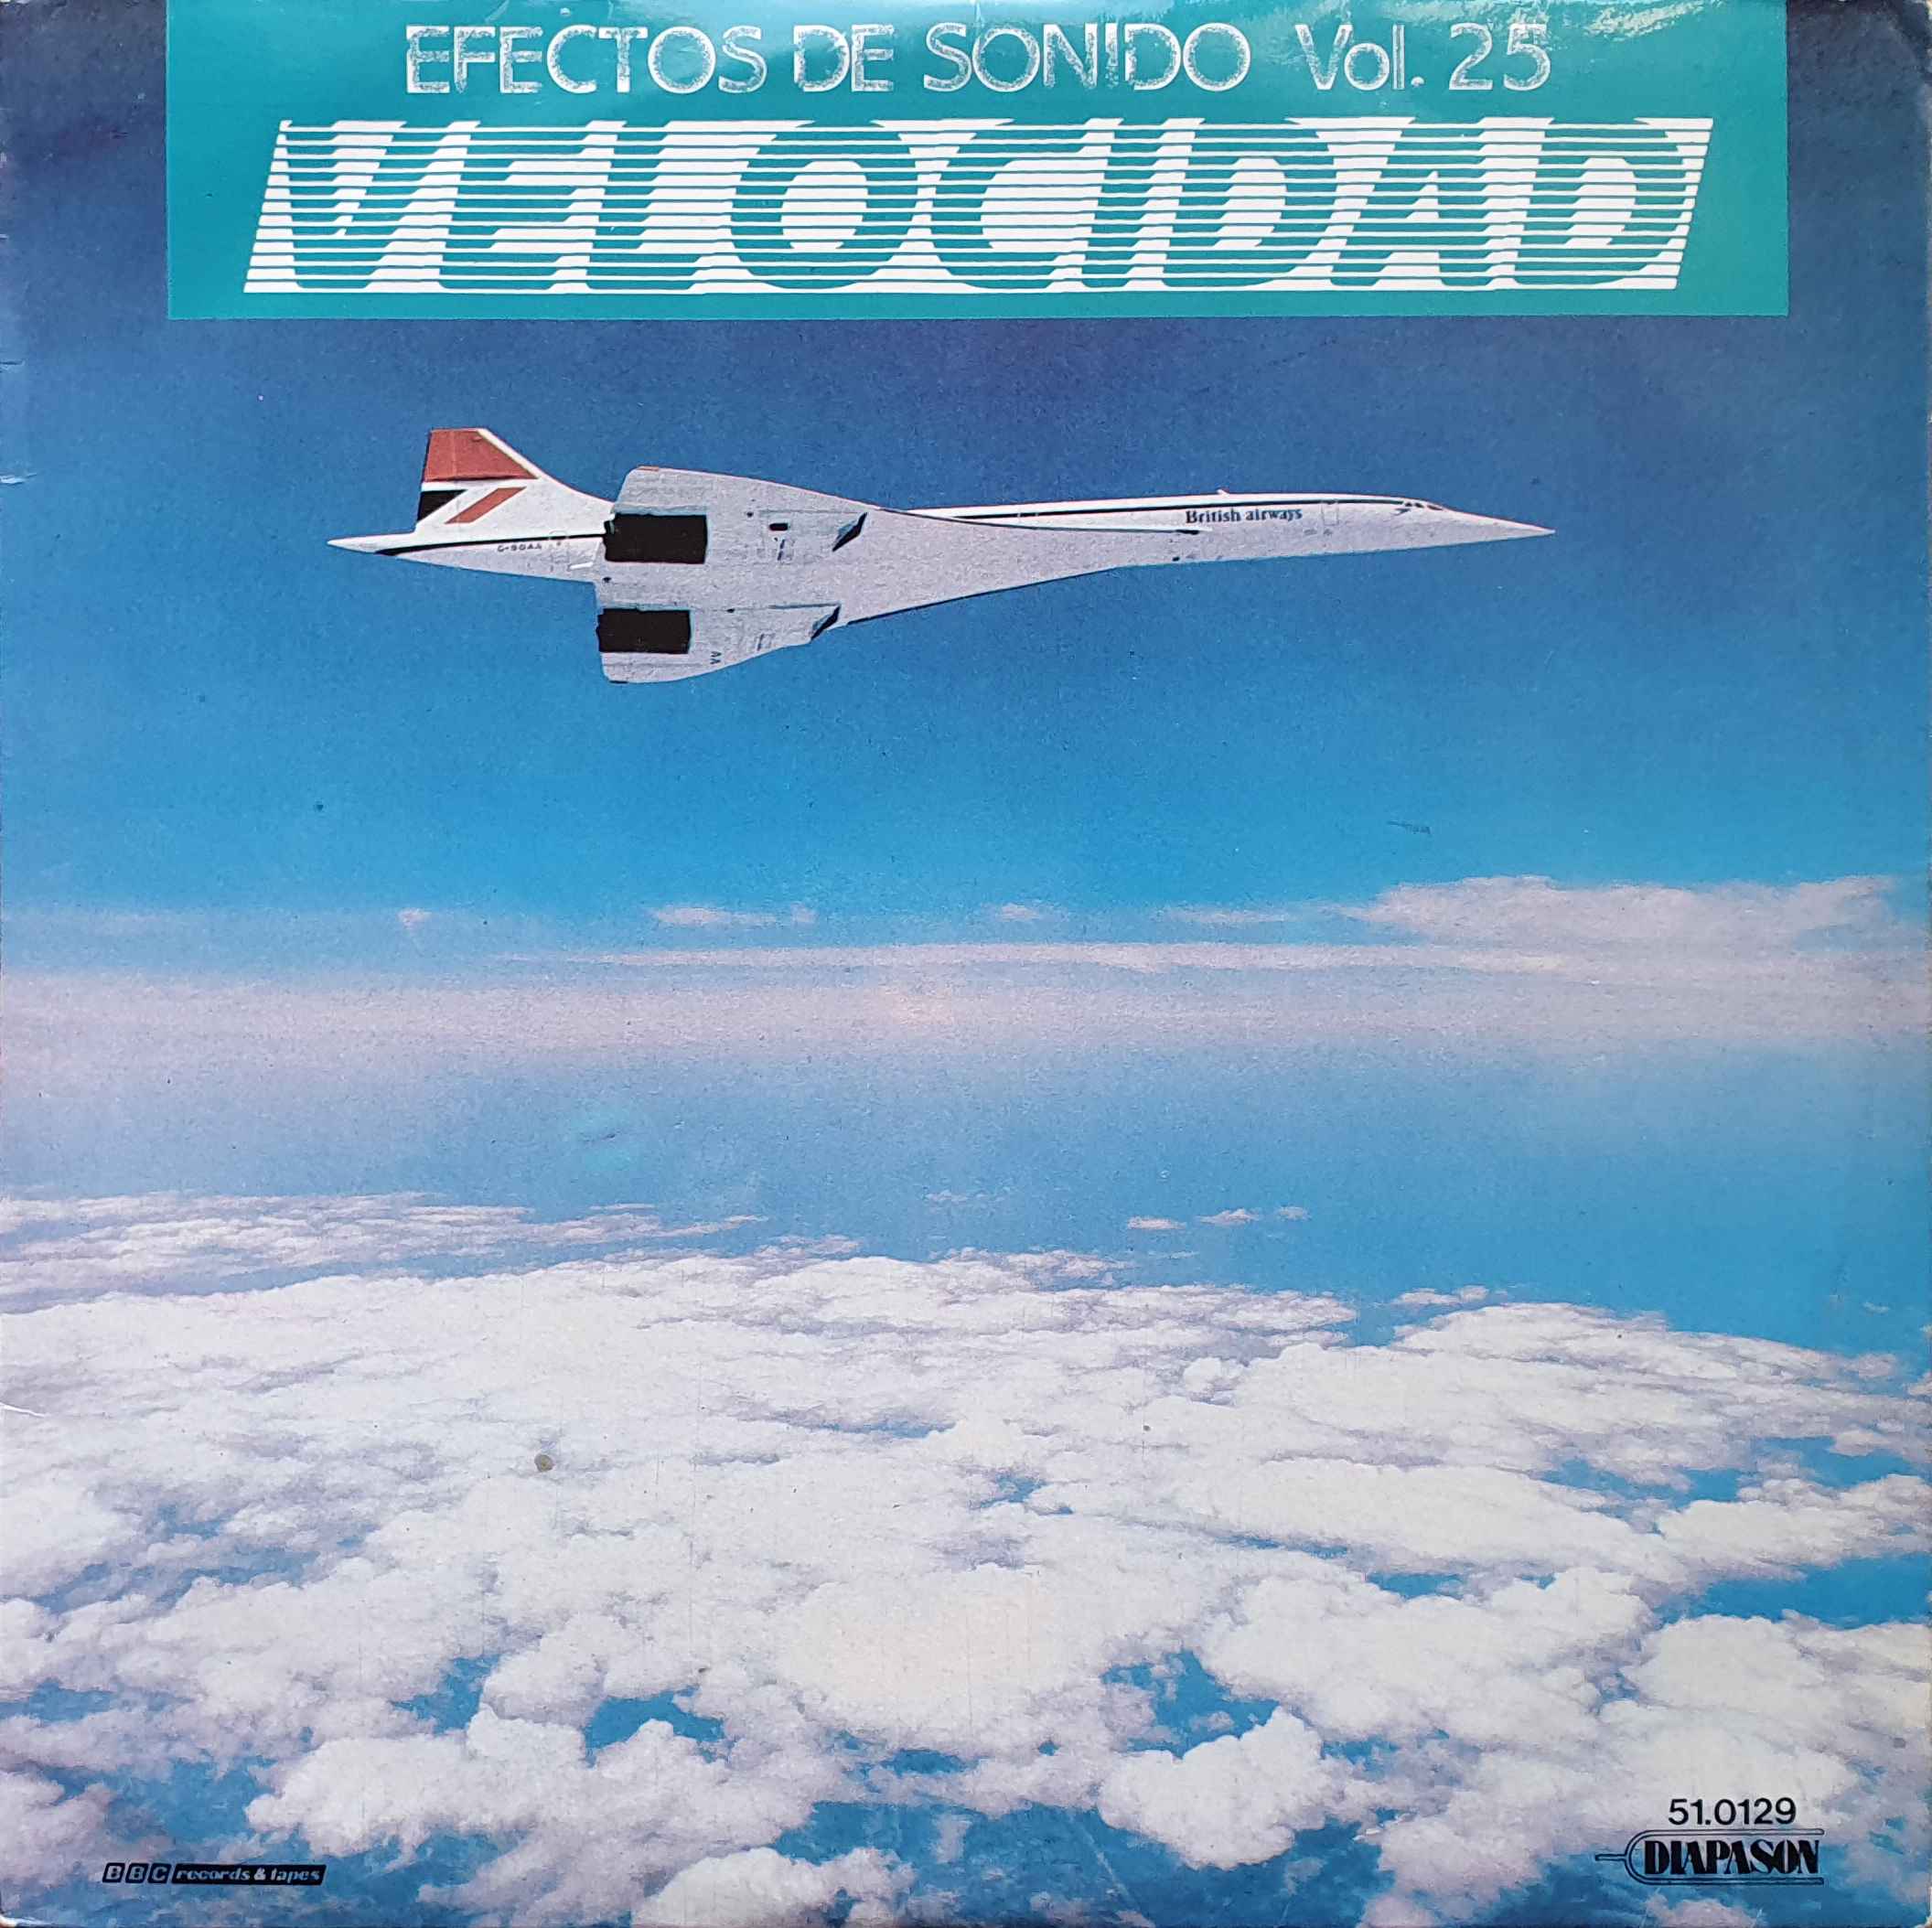 Picture of 51.0129 Efectos de sonido Vol. 25 - Velocidad by artist Various from the BBC albums - Records and Tapes library